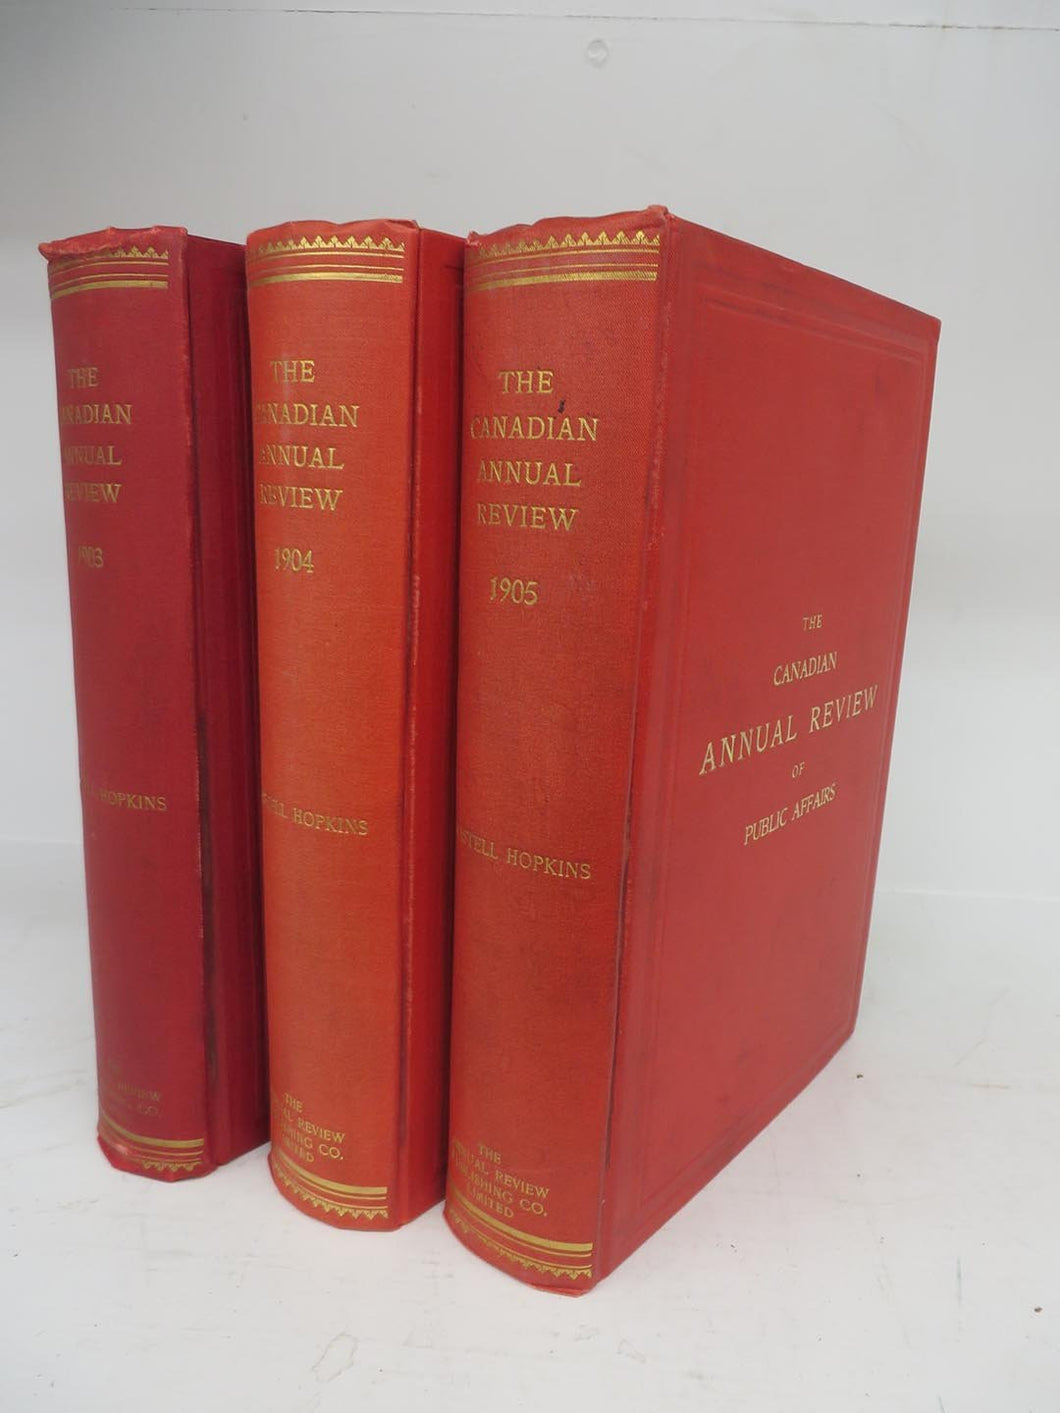 The Canadian Annual Review of Public Affairs: 1903, 1904, and 1905